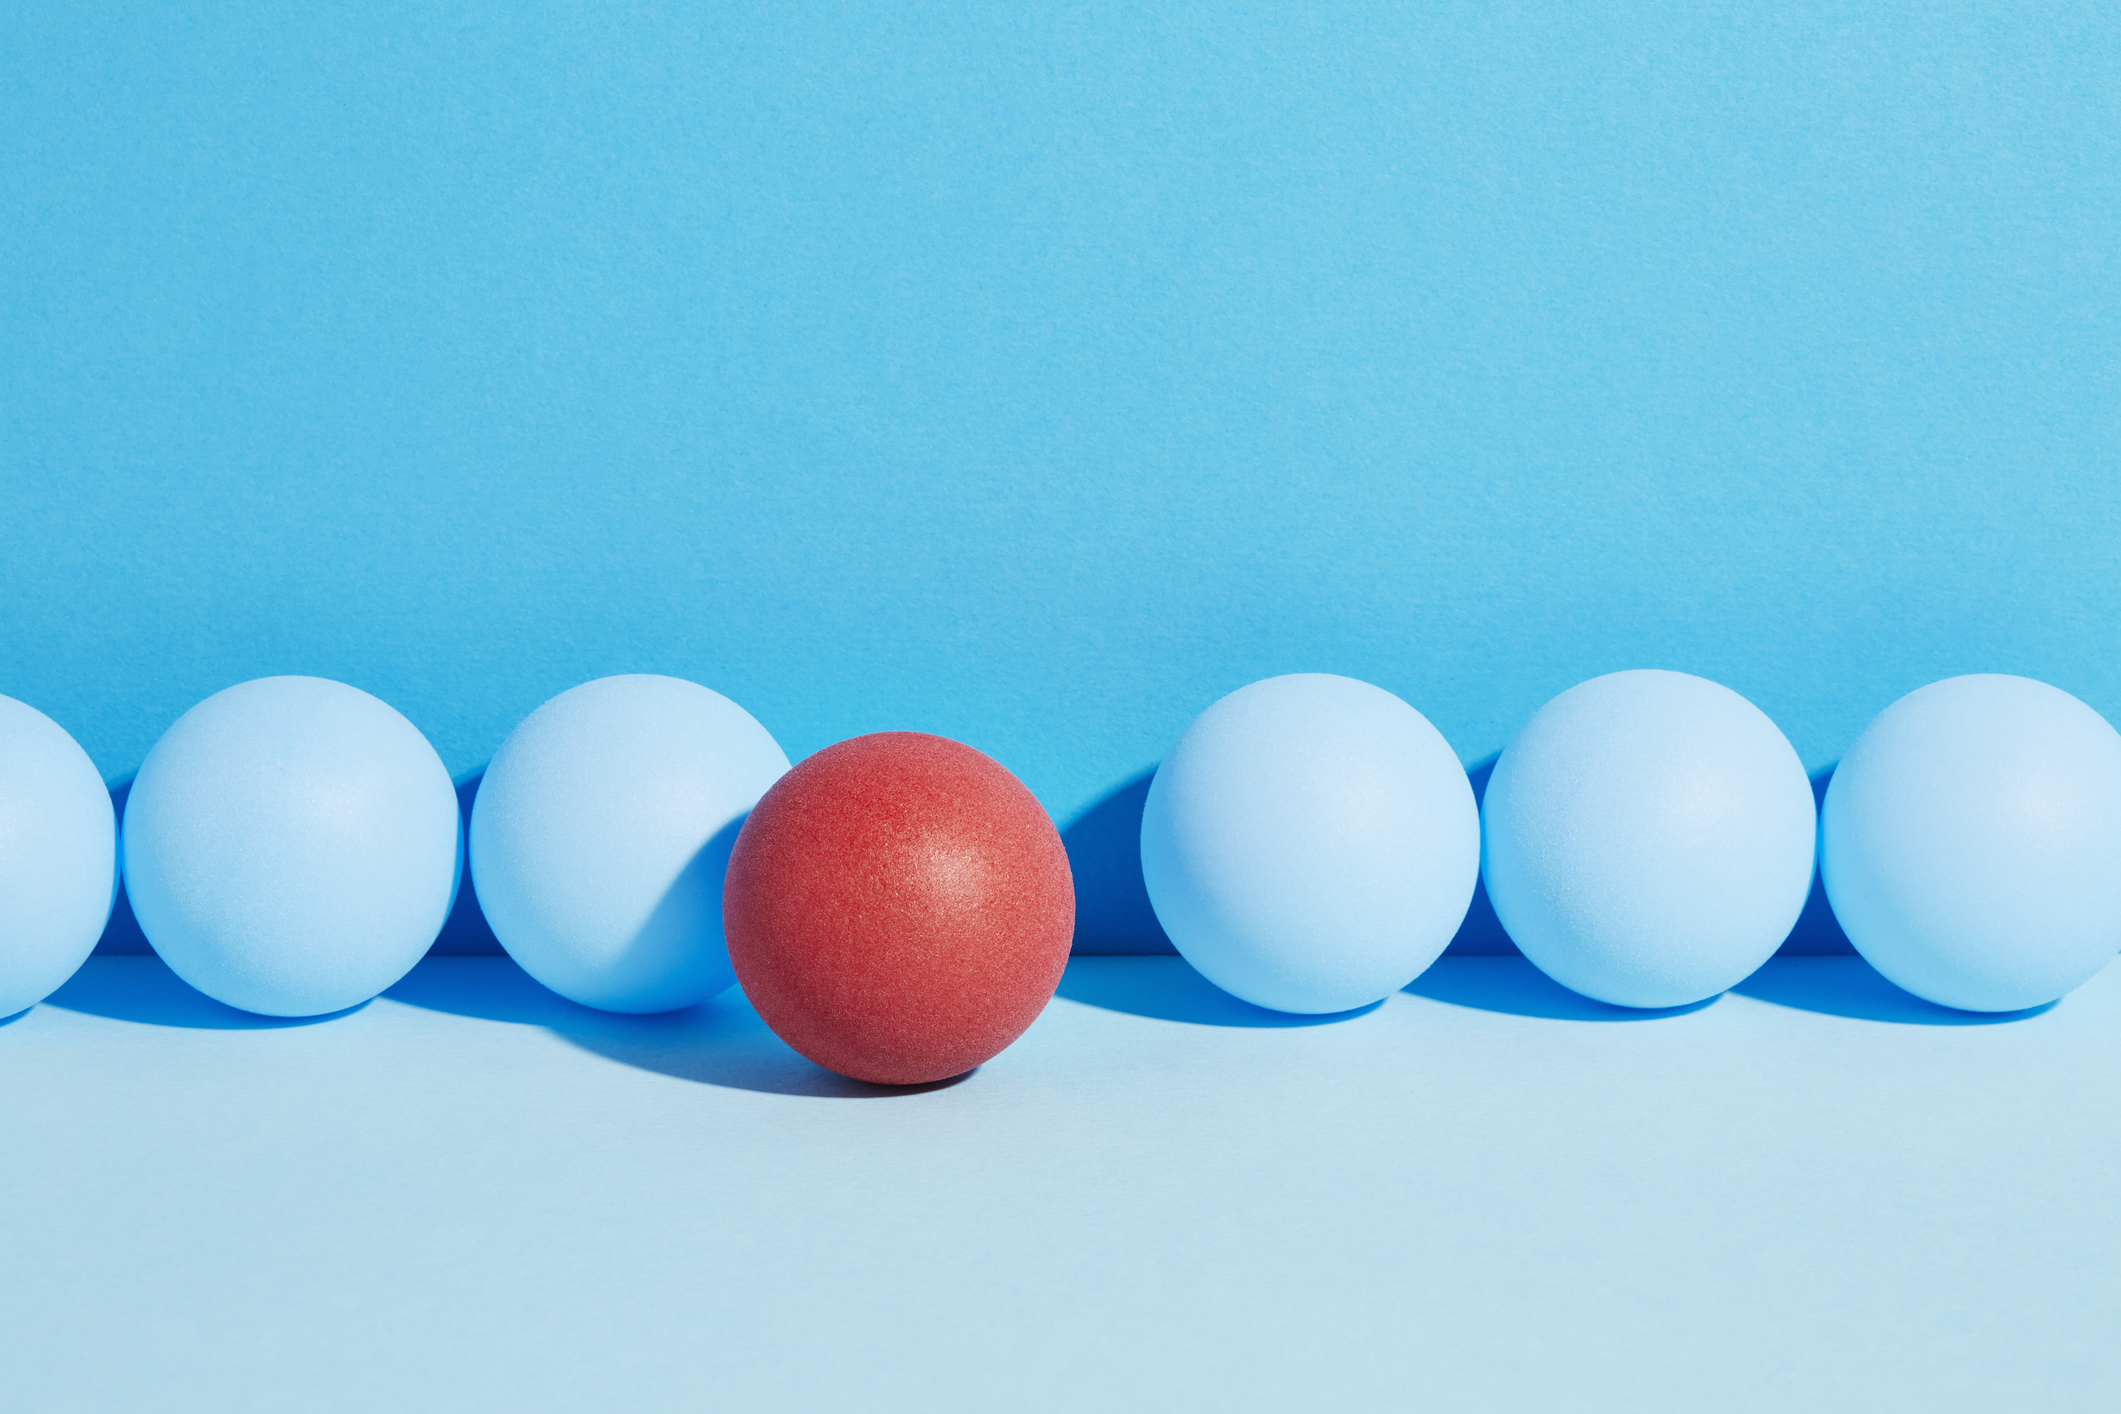 A red egg stands out from a group of blue eggs on a blue background, breaking the rule of conformity.